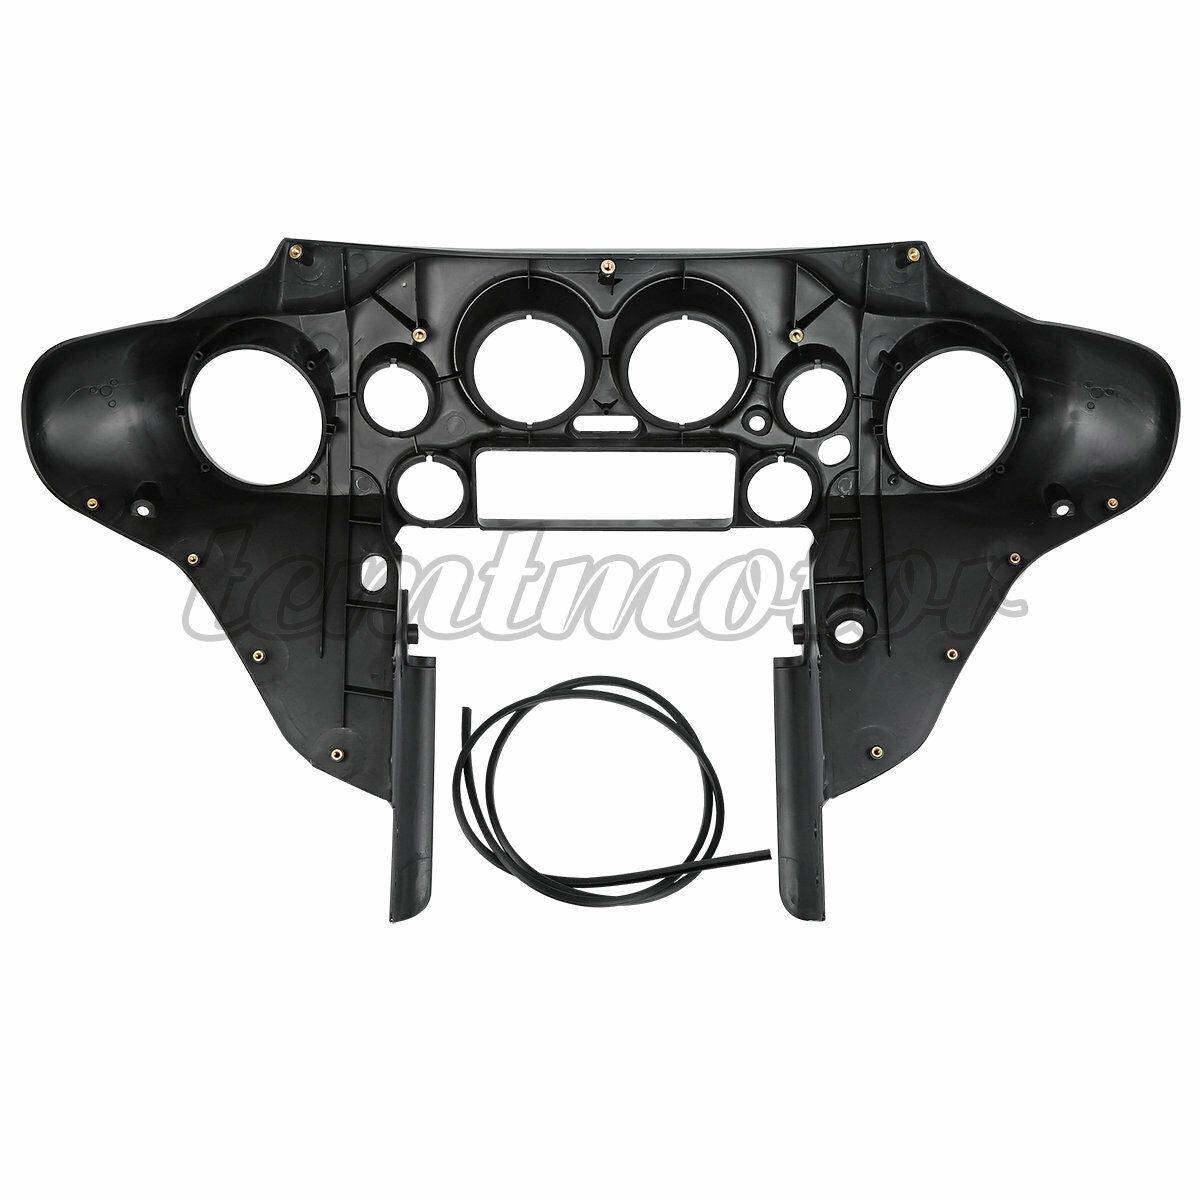 Black Speedometer Cover Cowl Inner Fairing Fit For Harley Electra Glide 96-13 12 - Moto Life Products